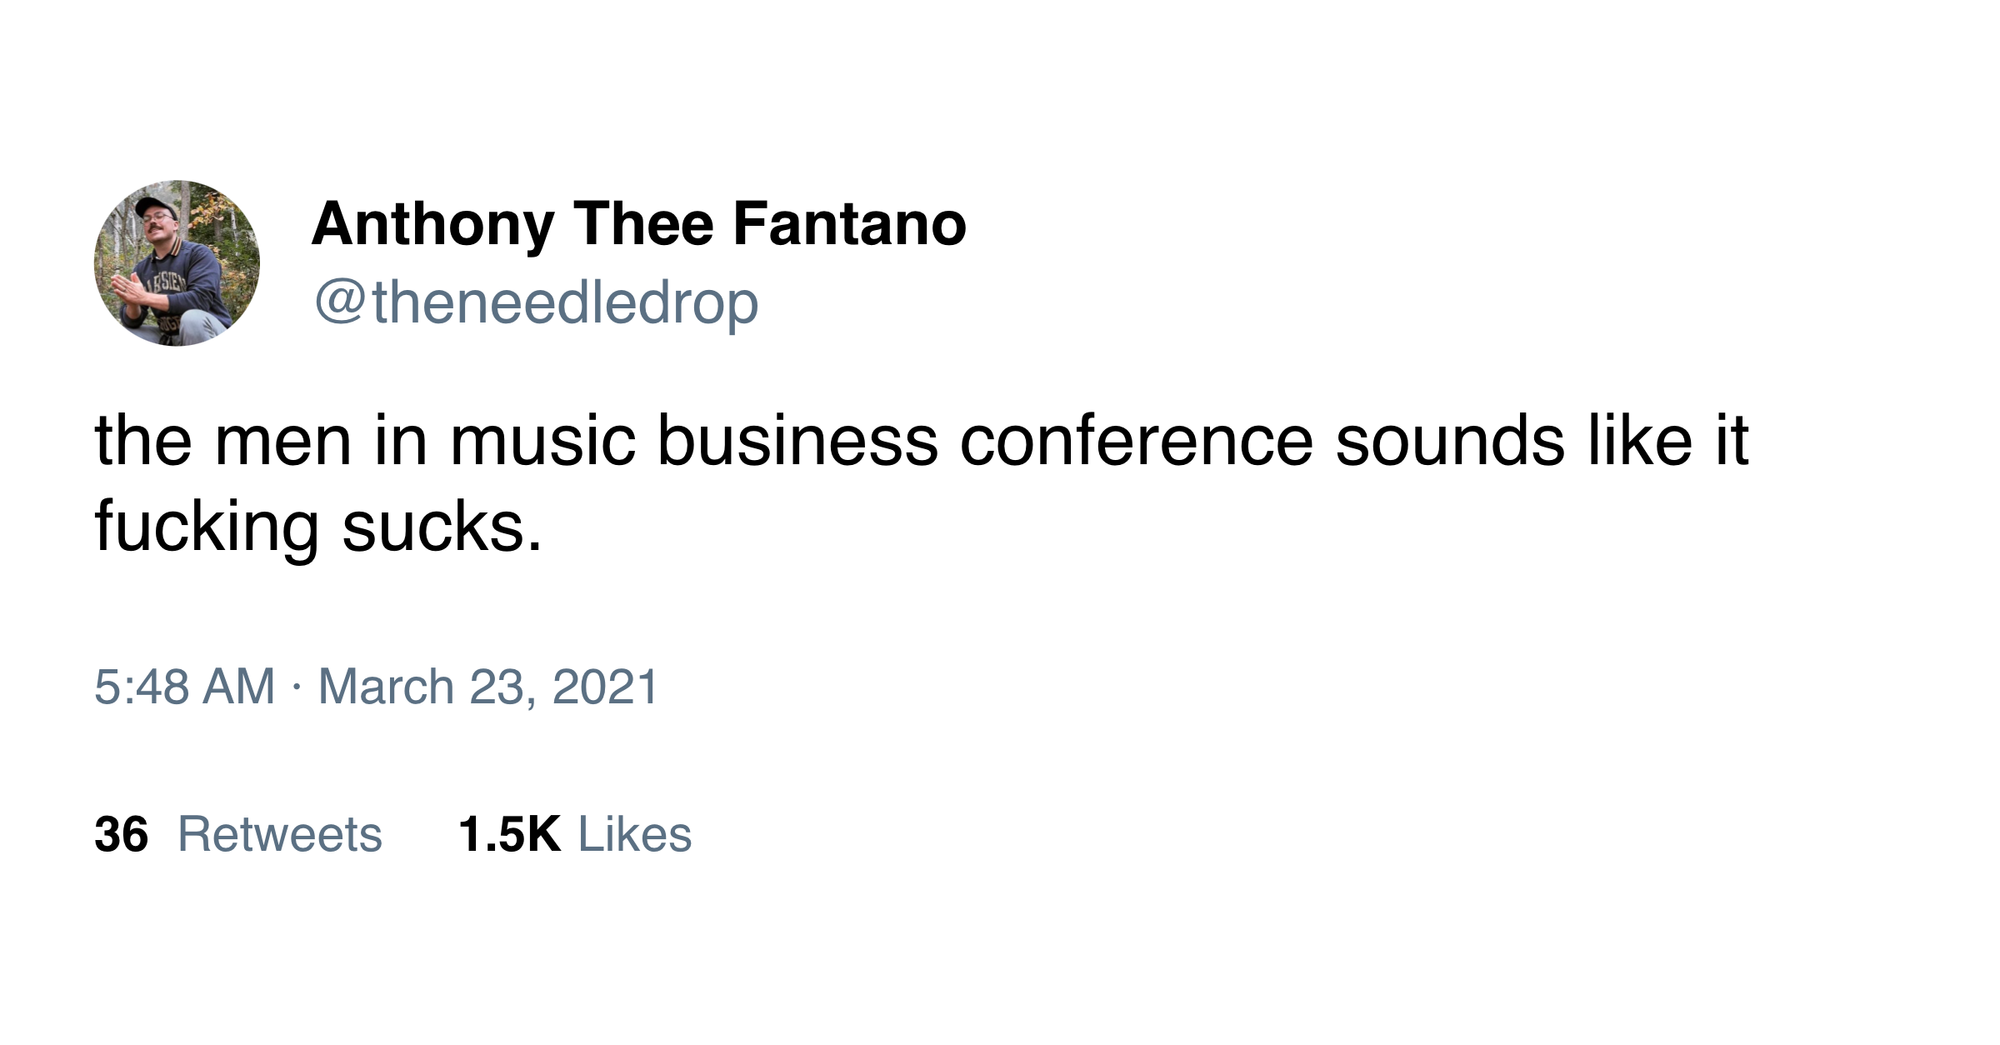 @theneedledrop on Twitter: "the men in music business conference sounds like it fucking sucks."